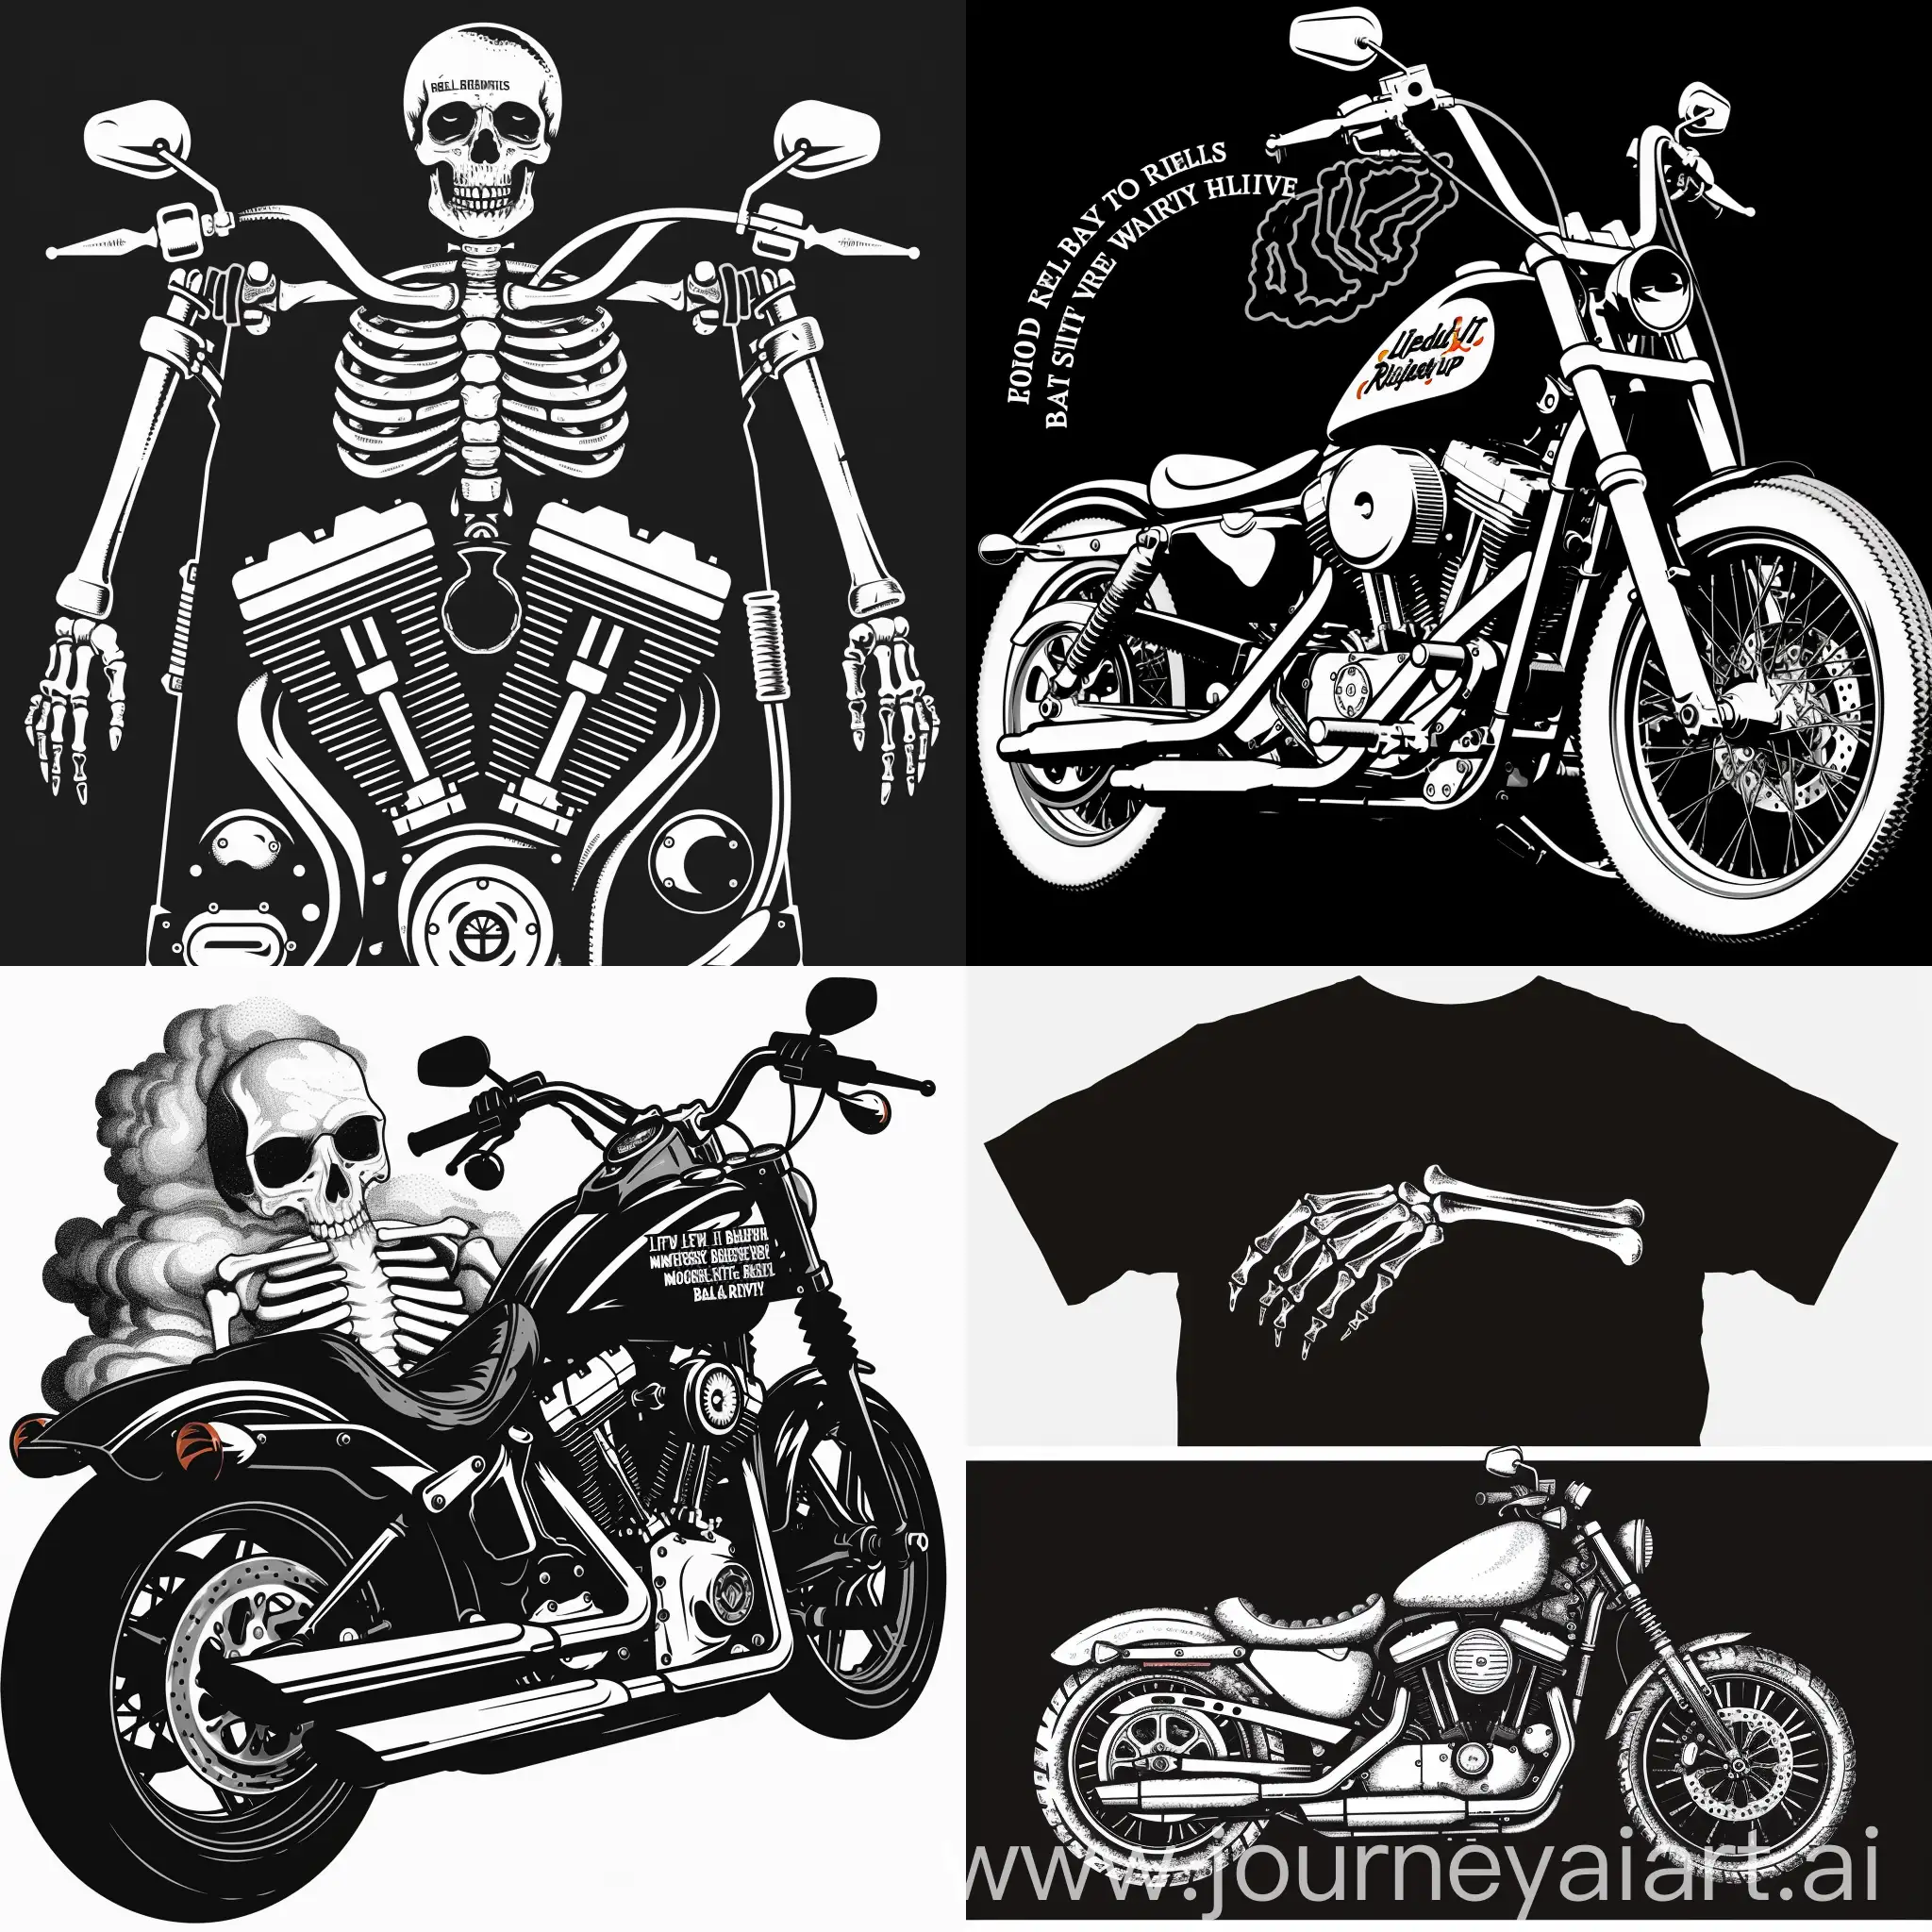 Rebel Riders is needing one more batch of t-shirt designs for our motorcycle apparel brand, Rebel Riders.

Designs Must Meet the Following Requirements:
1. All Black And White (No Color)
2. Design Artwork Must Be 12.5 Inches Wide (not page size, actual artwork)
3. Minimum 300 DPI
4. All Shading Must Be 45 LPI halftones. Not the entire design, just the shading areas need to be 45 LPI halftones. If there is no shading in your design, than this does not apply to you.
5. Original Designs Only - If I see a single entry that has already been submitted in a previous contest, you will automatically be eliminated.

Design Ideas (Feel Free to Use Your Own Concepts):

"If You Can Read This, Back the F*ck Up"

"Keep It Twisted" (maybe an image with a skeleton hand on a throttle?)

"Good Girls Sit, Bad B*tches Ride"

"Motorcycles & Mascara"

"Life Behind Bars"

"Loud Pipes Save Lives"

"Looks Like a Beauty, Rides Like a Beast"

"Everyone Loves a Fat Rear"

"I (HEART) Dirty Biker Chicks"

"Real Women Ride Men Who Ride Motorcycles"

Use these for inspiration but if you have a unique idea, we would love to see it. Need clever designs for both men and women t shirts.